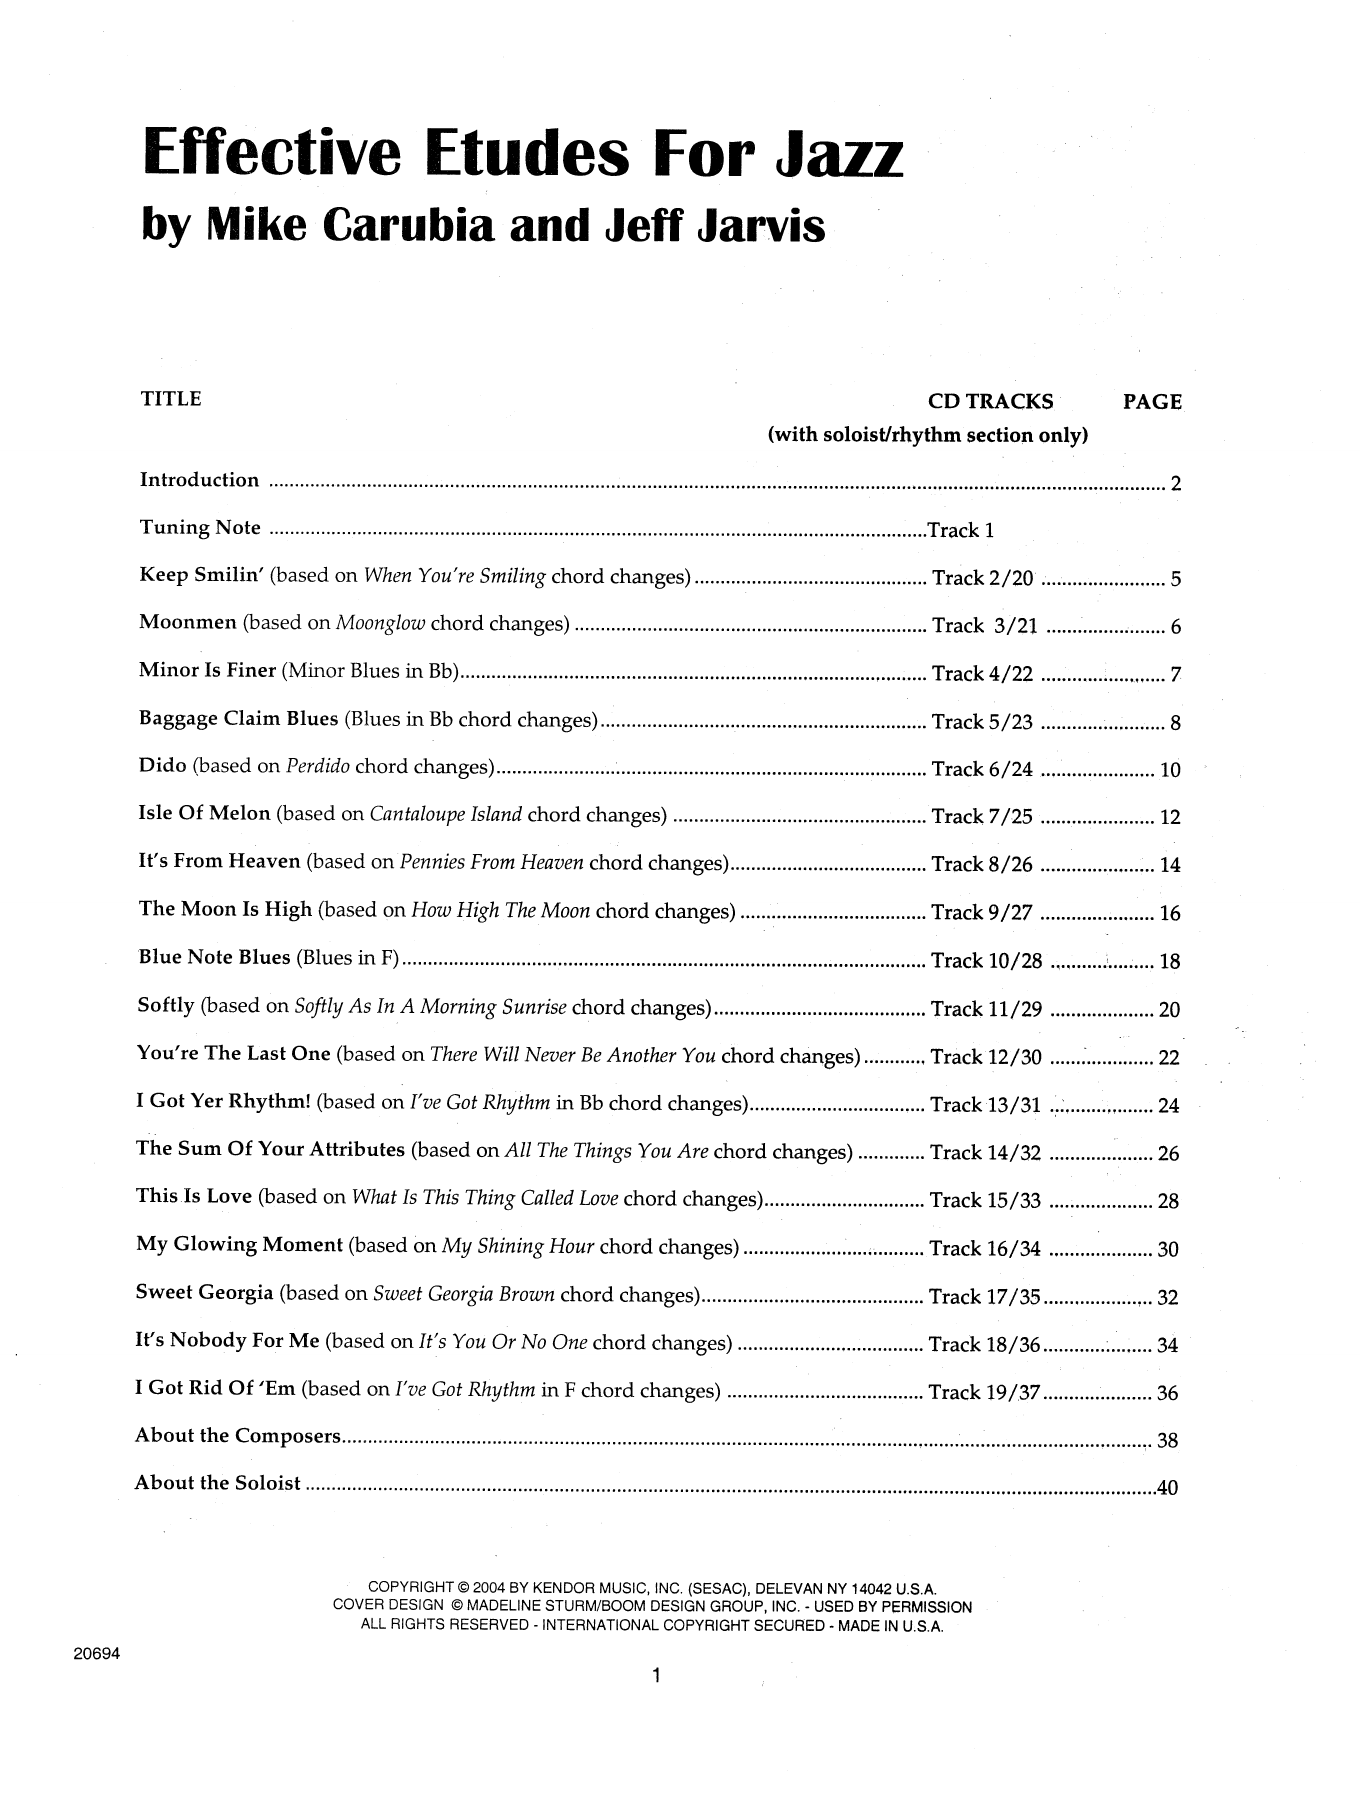 Download Jeff Jarvis Effective Etudes For Jazz - Eb Baritone Sheet Music